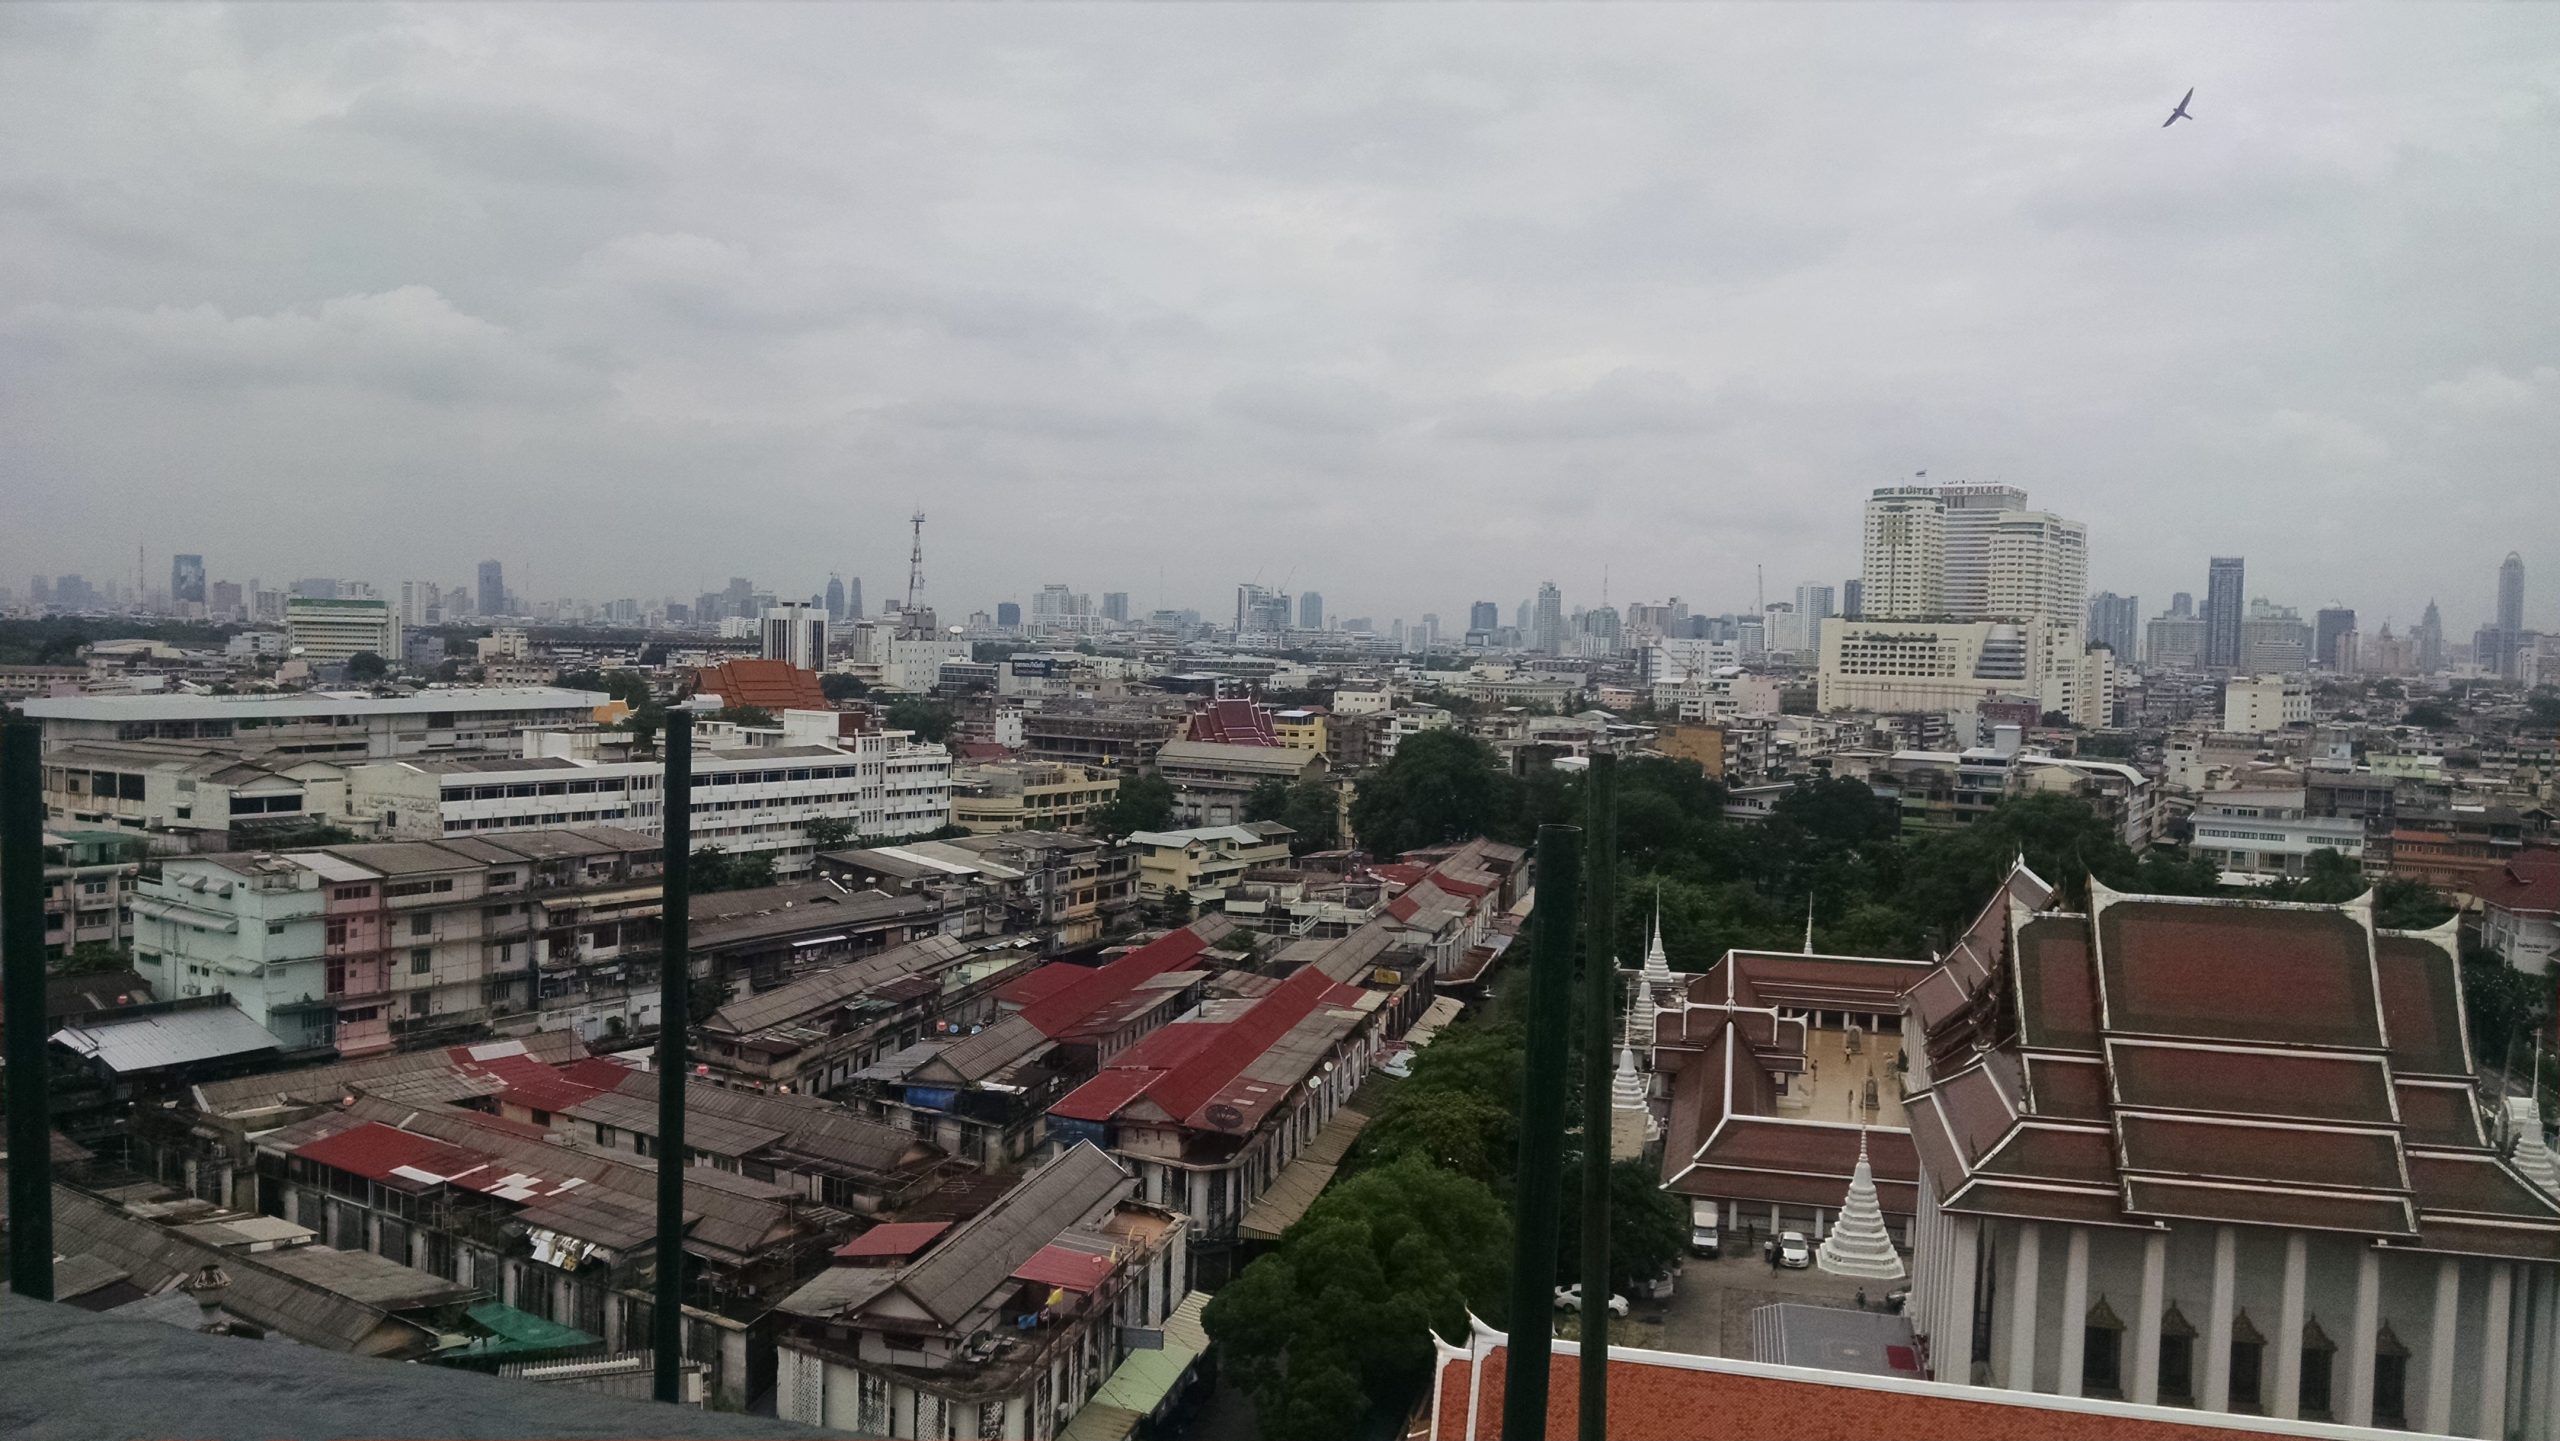 View of Bangkok before we left for Chiang Mai